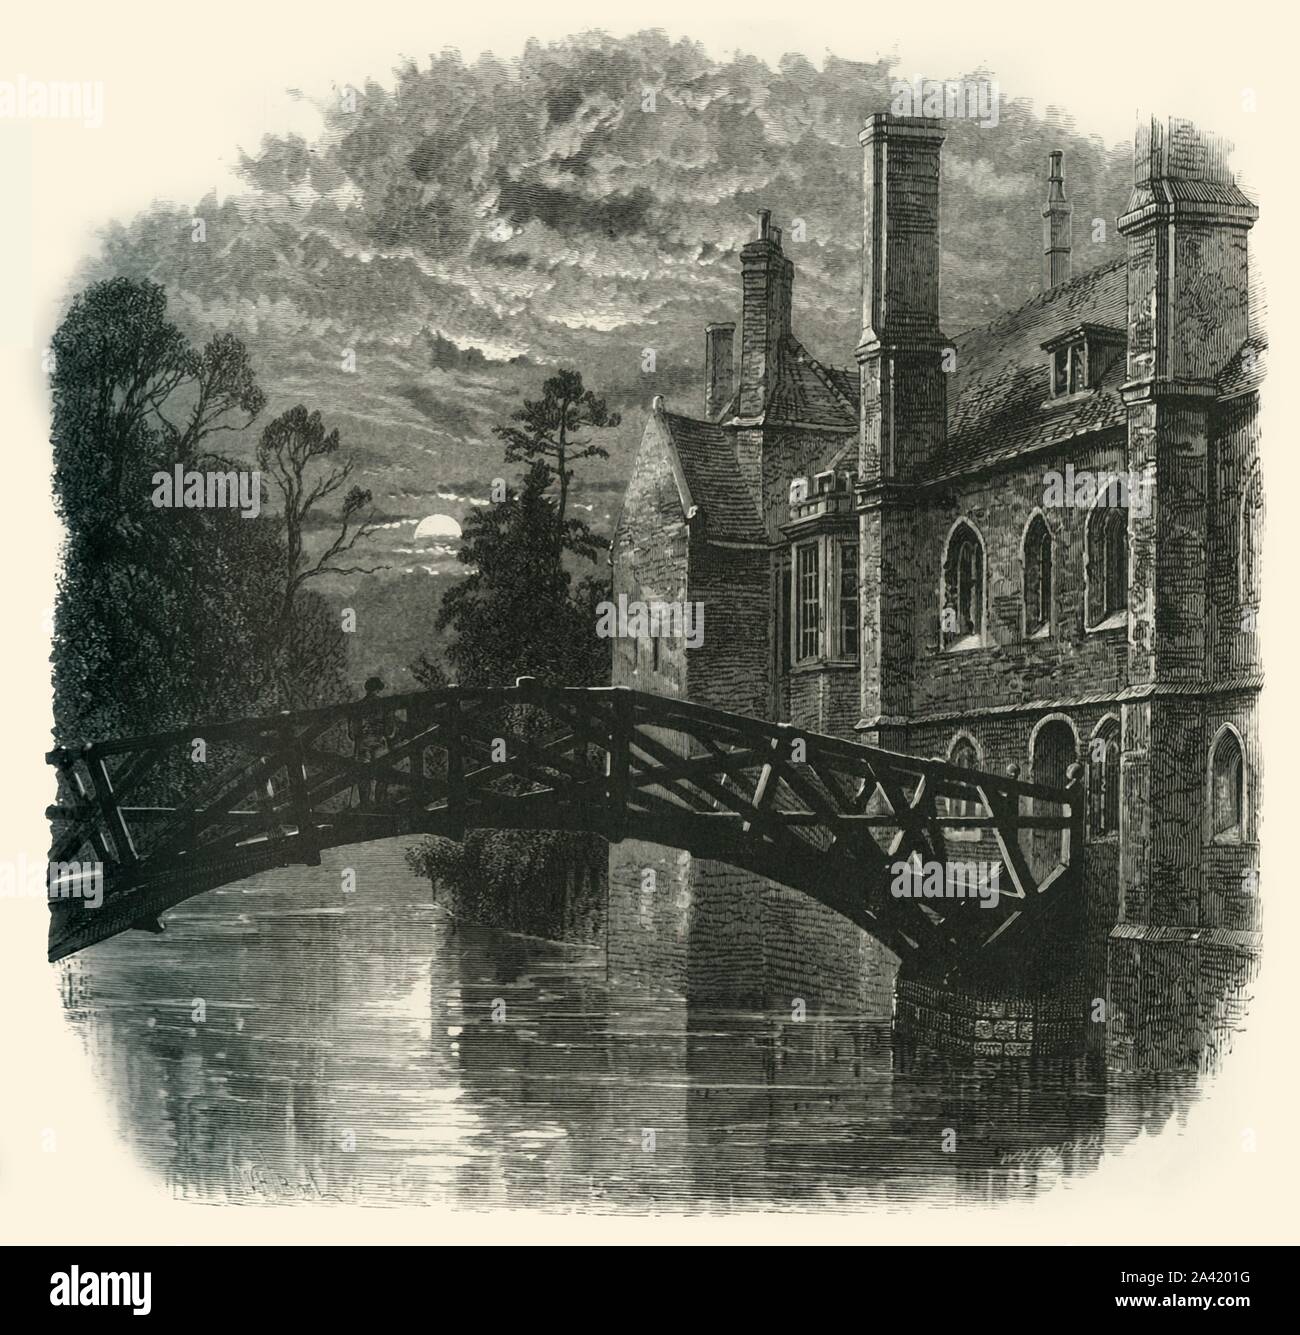 'Bridge at Queen's College', c1870. Mathematical Bridge on the River Cam at Queen's College, Cambridge designed by William Etheridge, and built by James Essex in 1749, rebuilt  in 1866 and in 1905, to the same overall design. From &quot;Picturesque Europe - The British Isles, Vol. II&quot;. [Cassell, Petter &amp; Galpin, London, c1870] Stock Photo